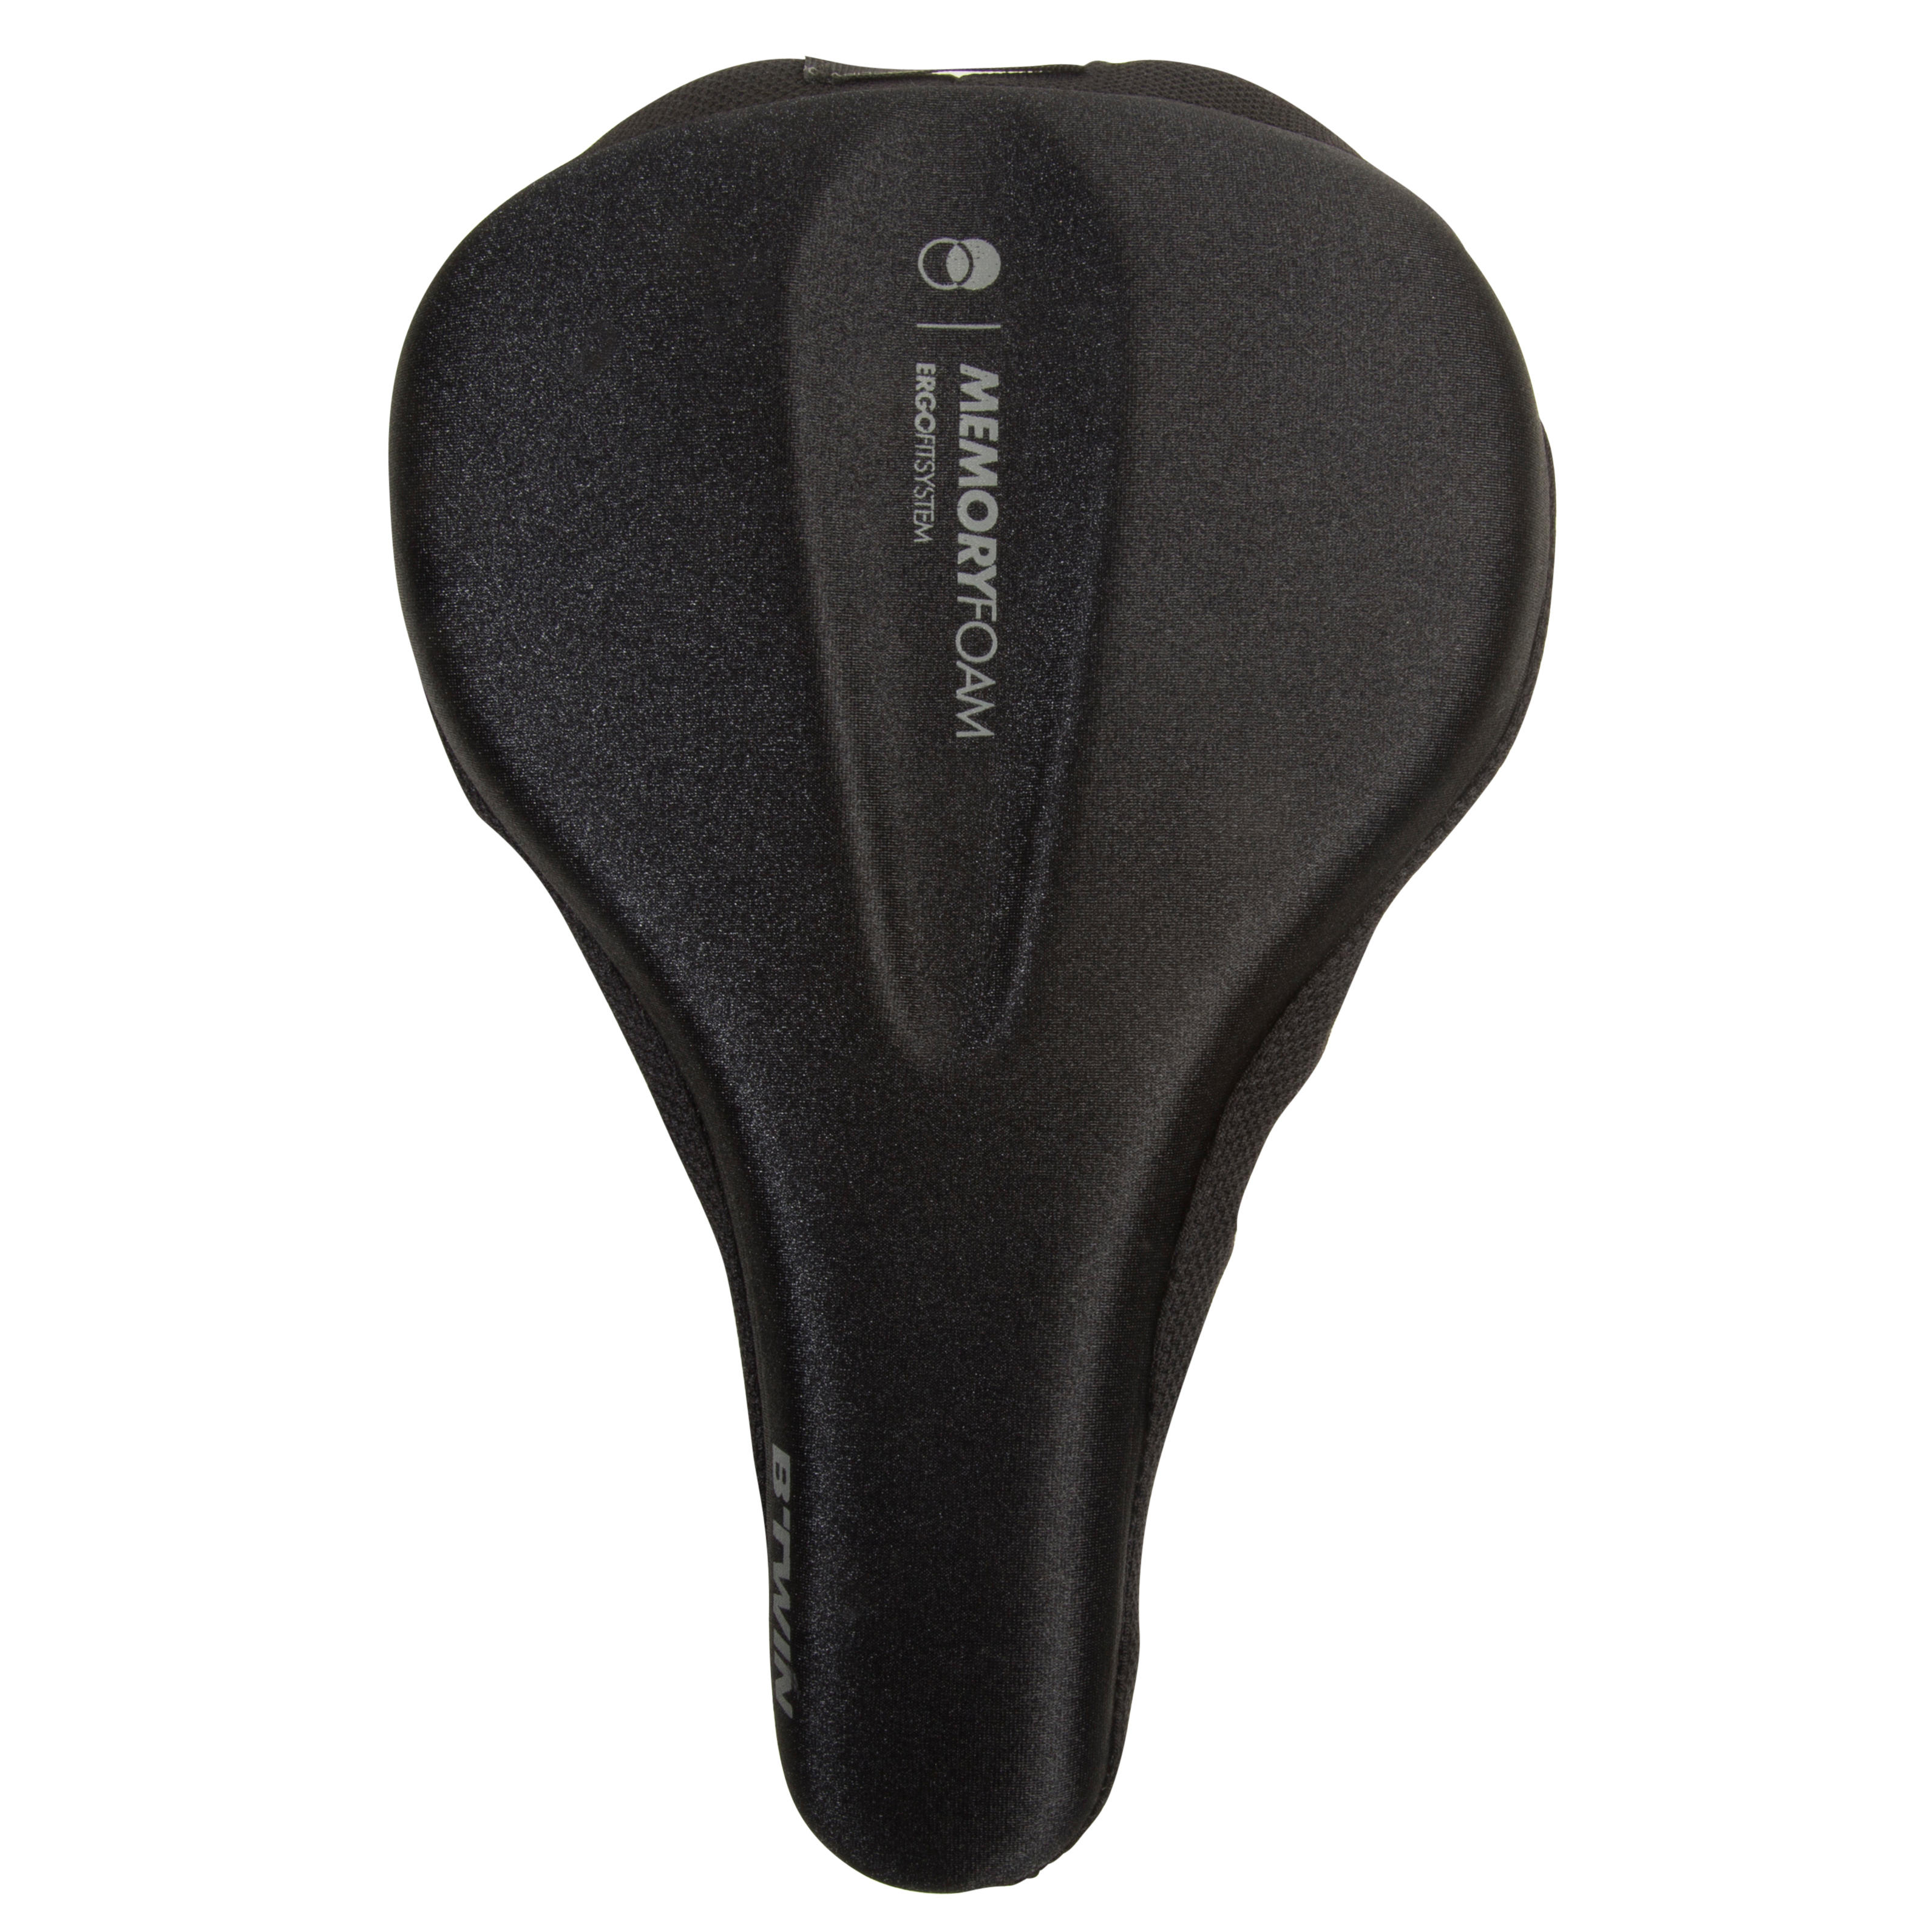 decathlon bicycle seat cover